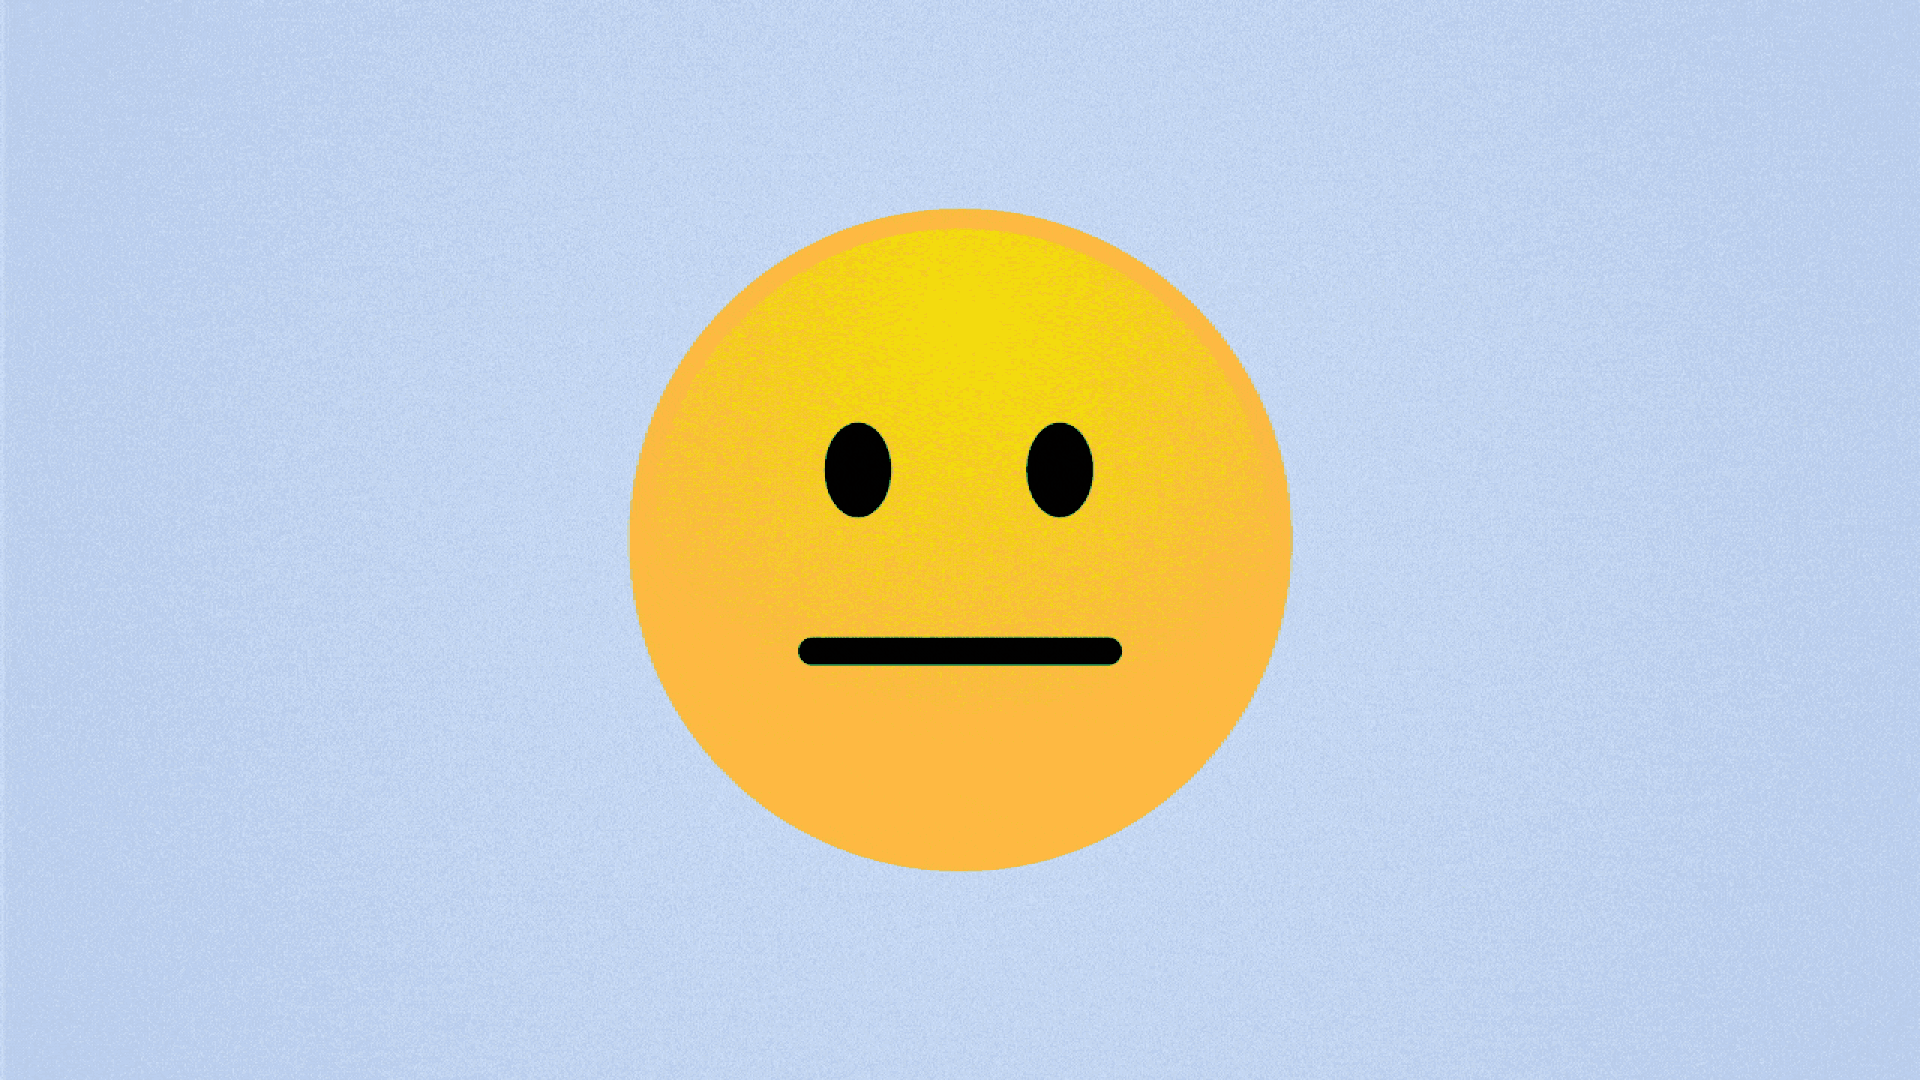 Illustration of a neutral emoji turning green and smiling.